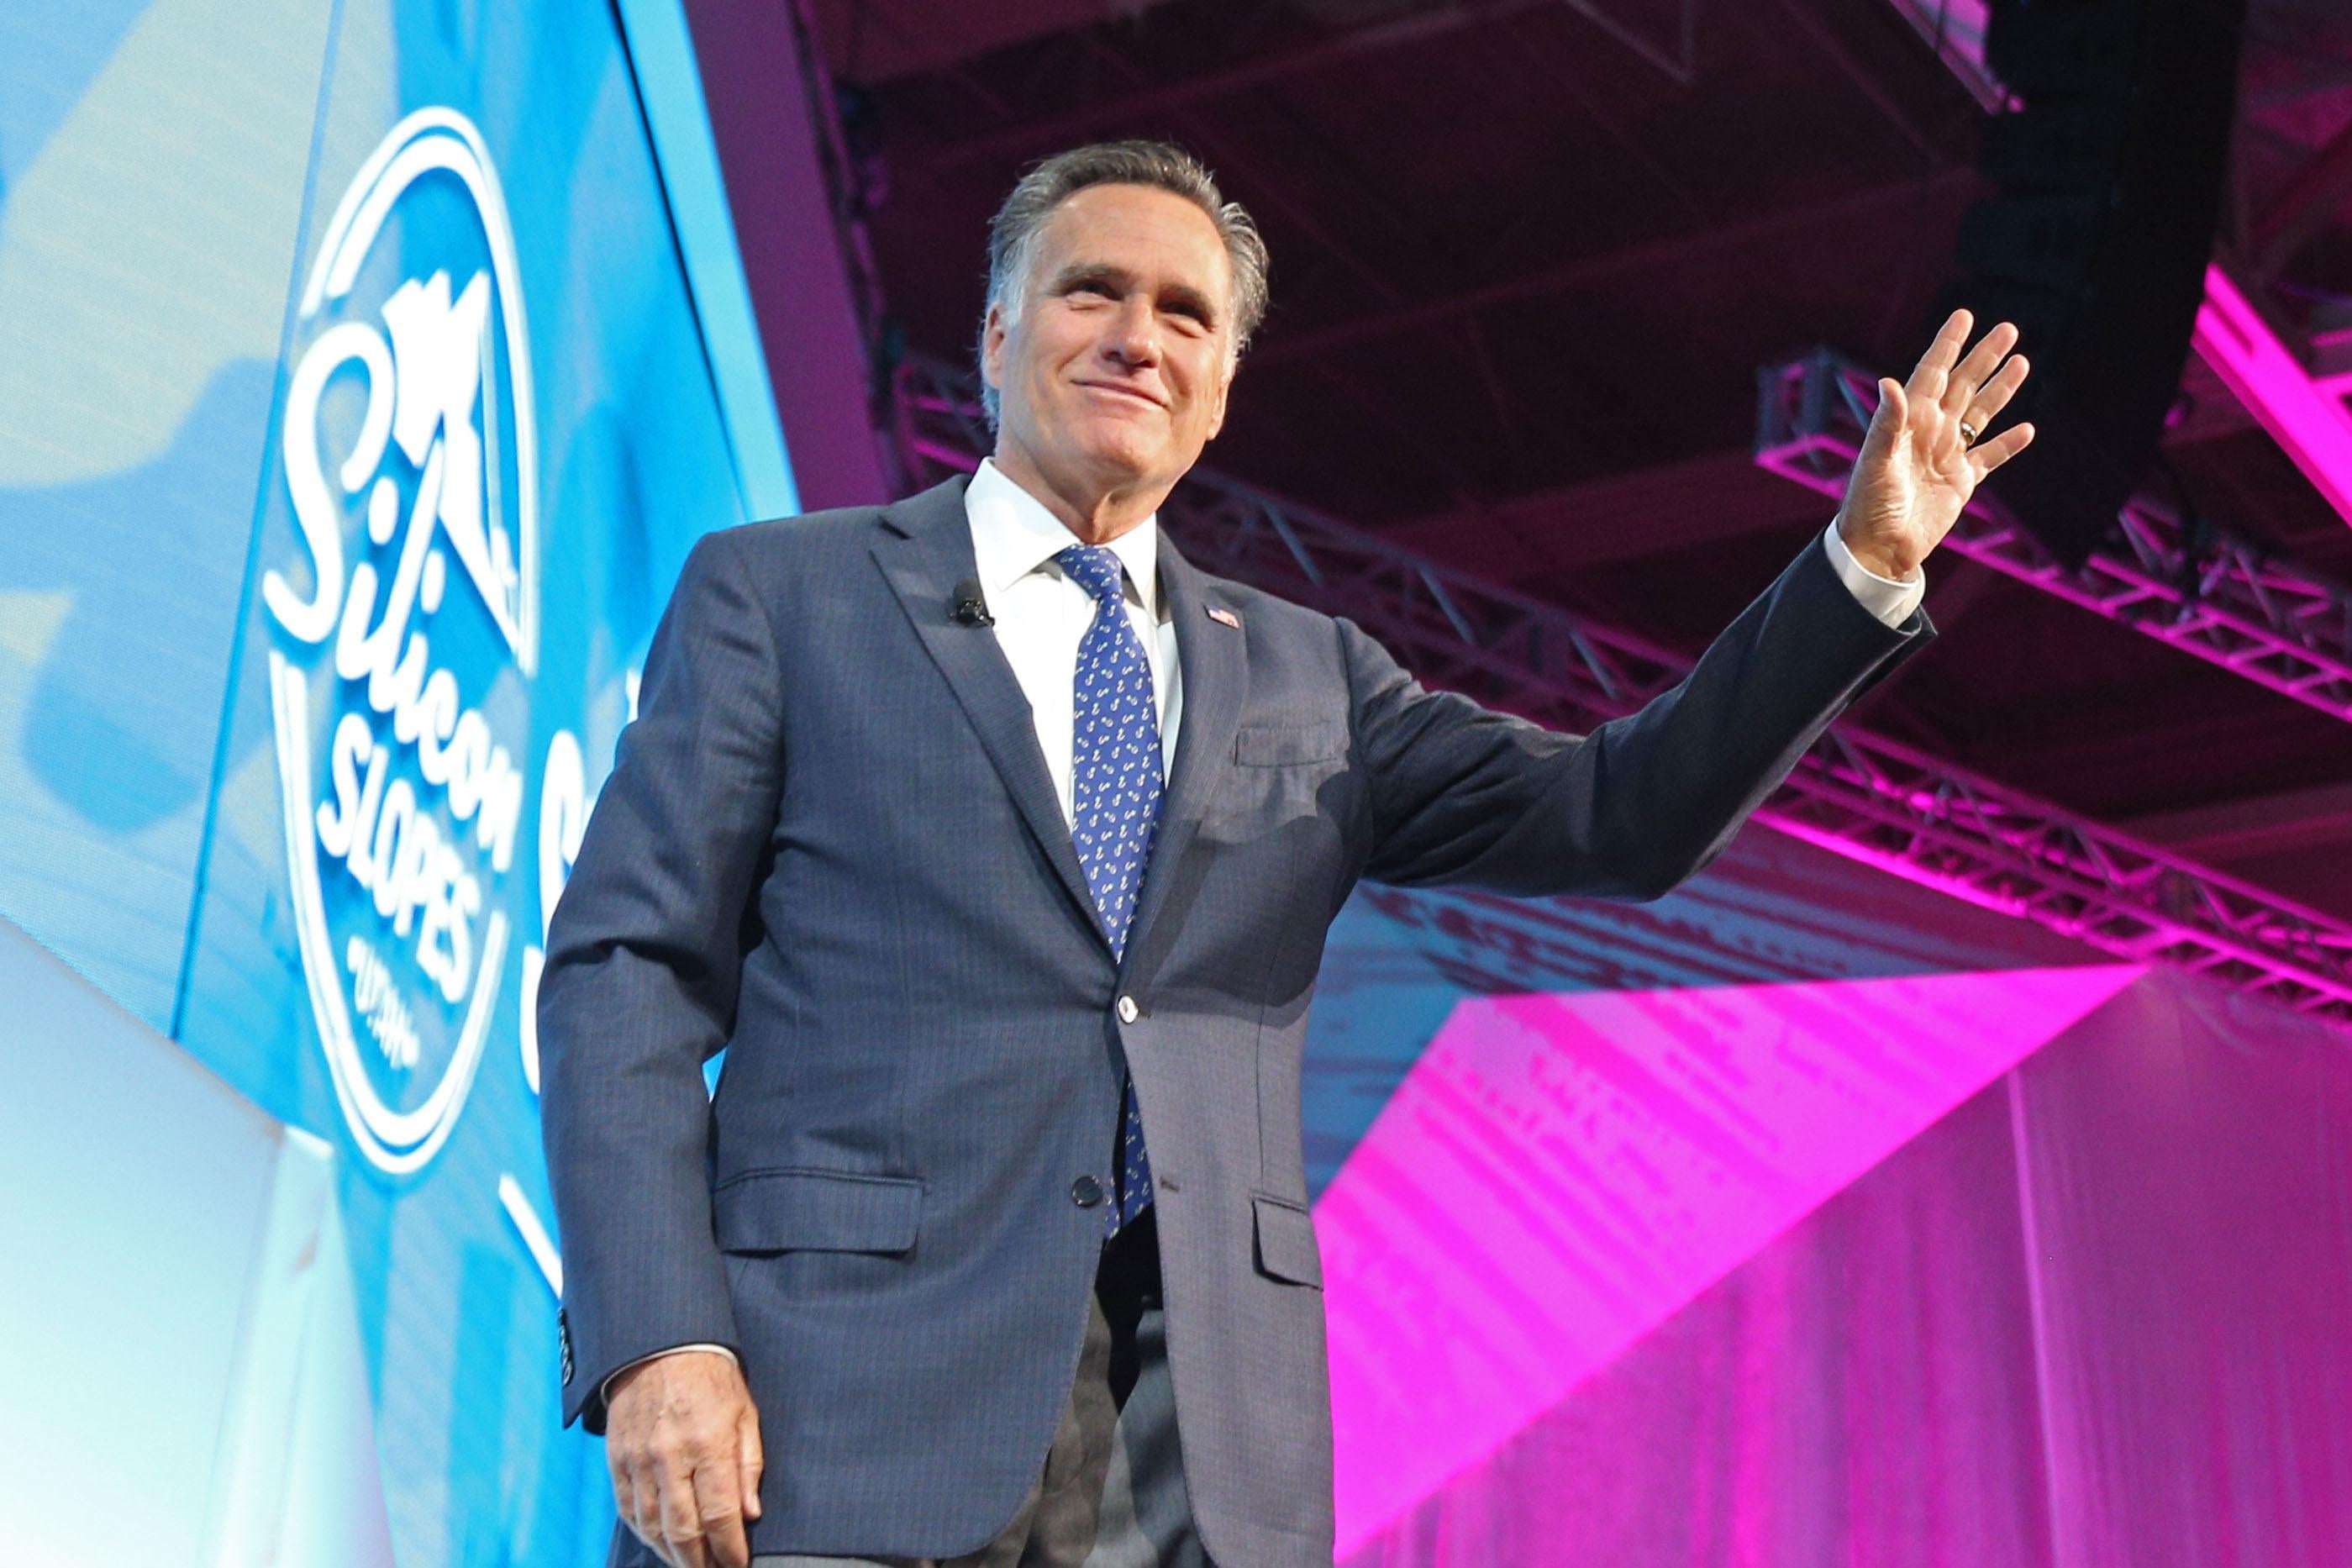 Mitt Romney waves as he leaves the stage at the Silicon Slopes Tech Conference in Salt Lake City, Utah.